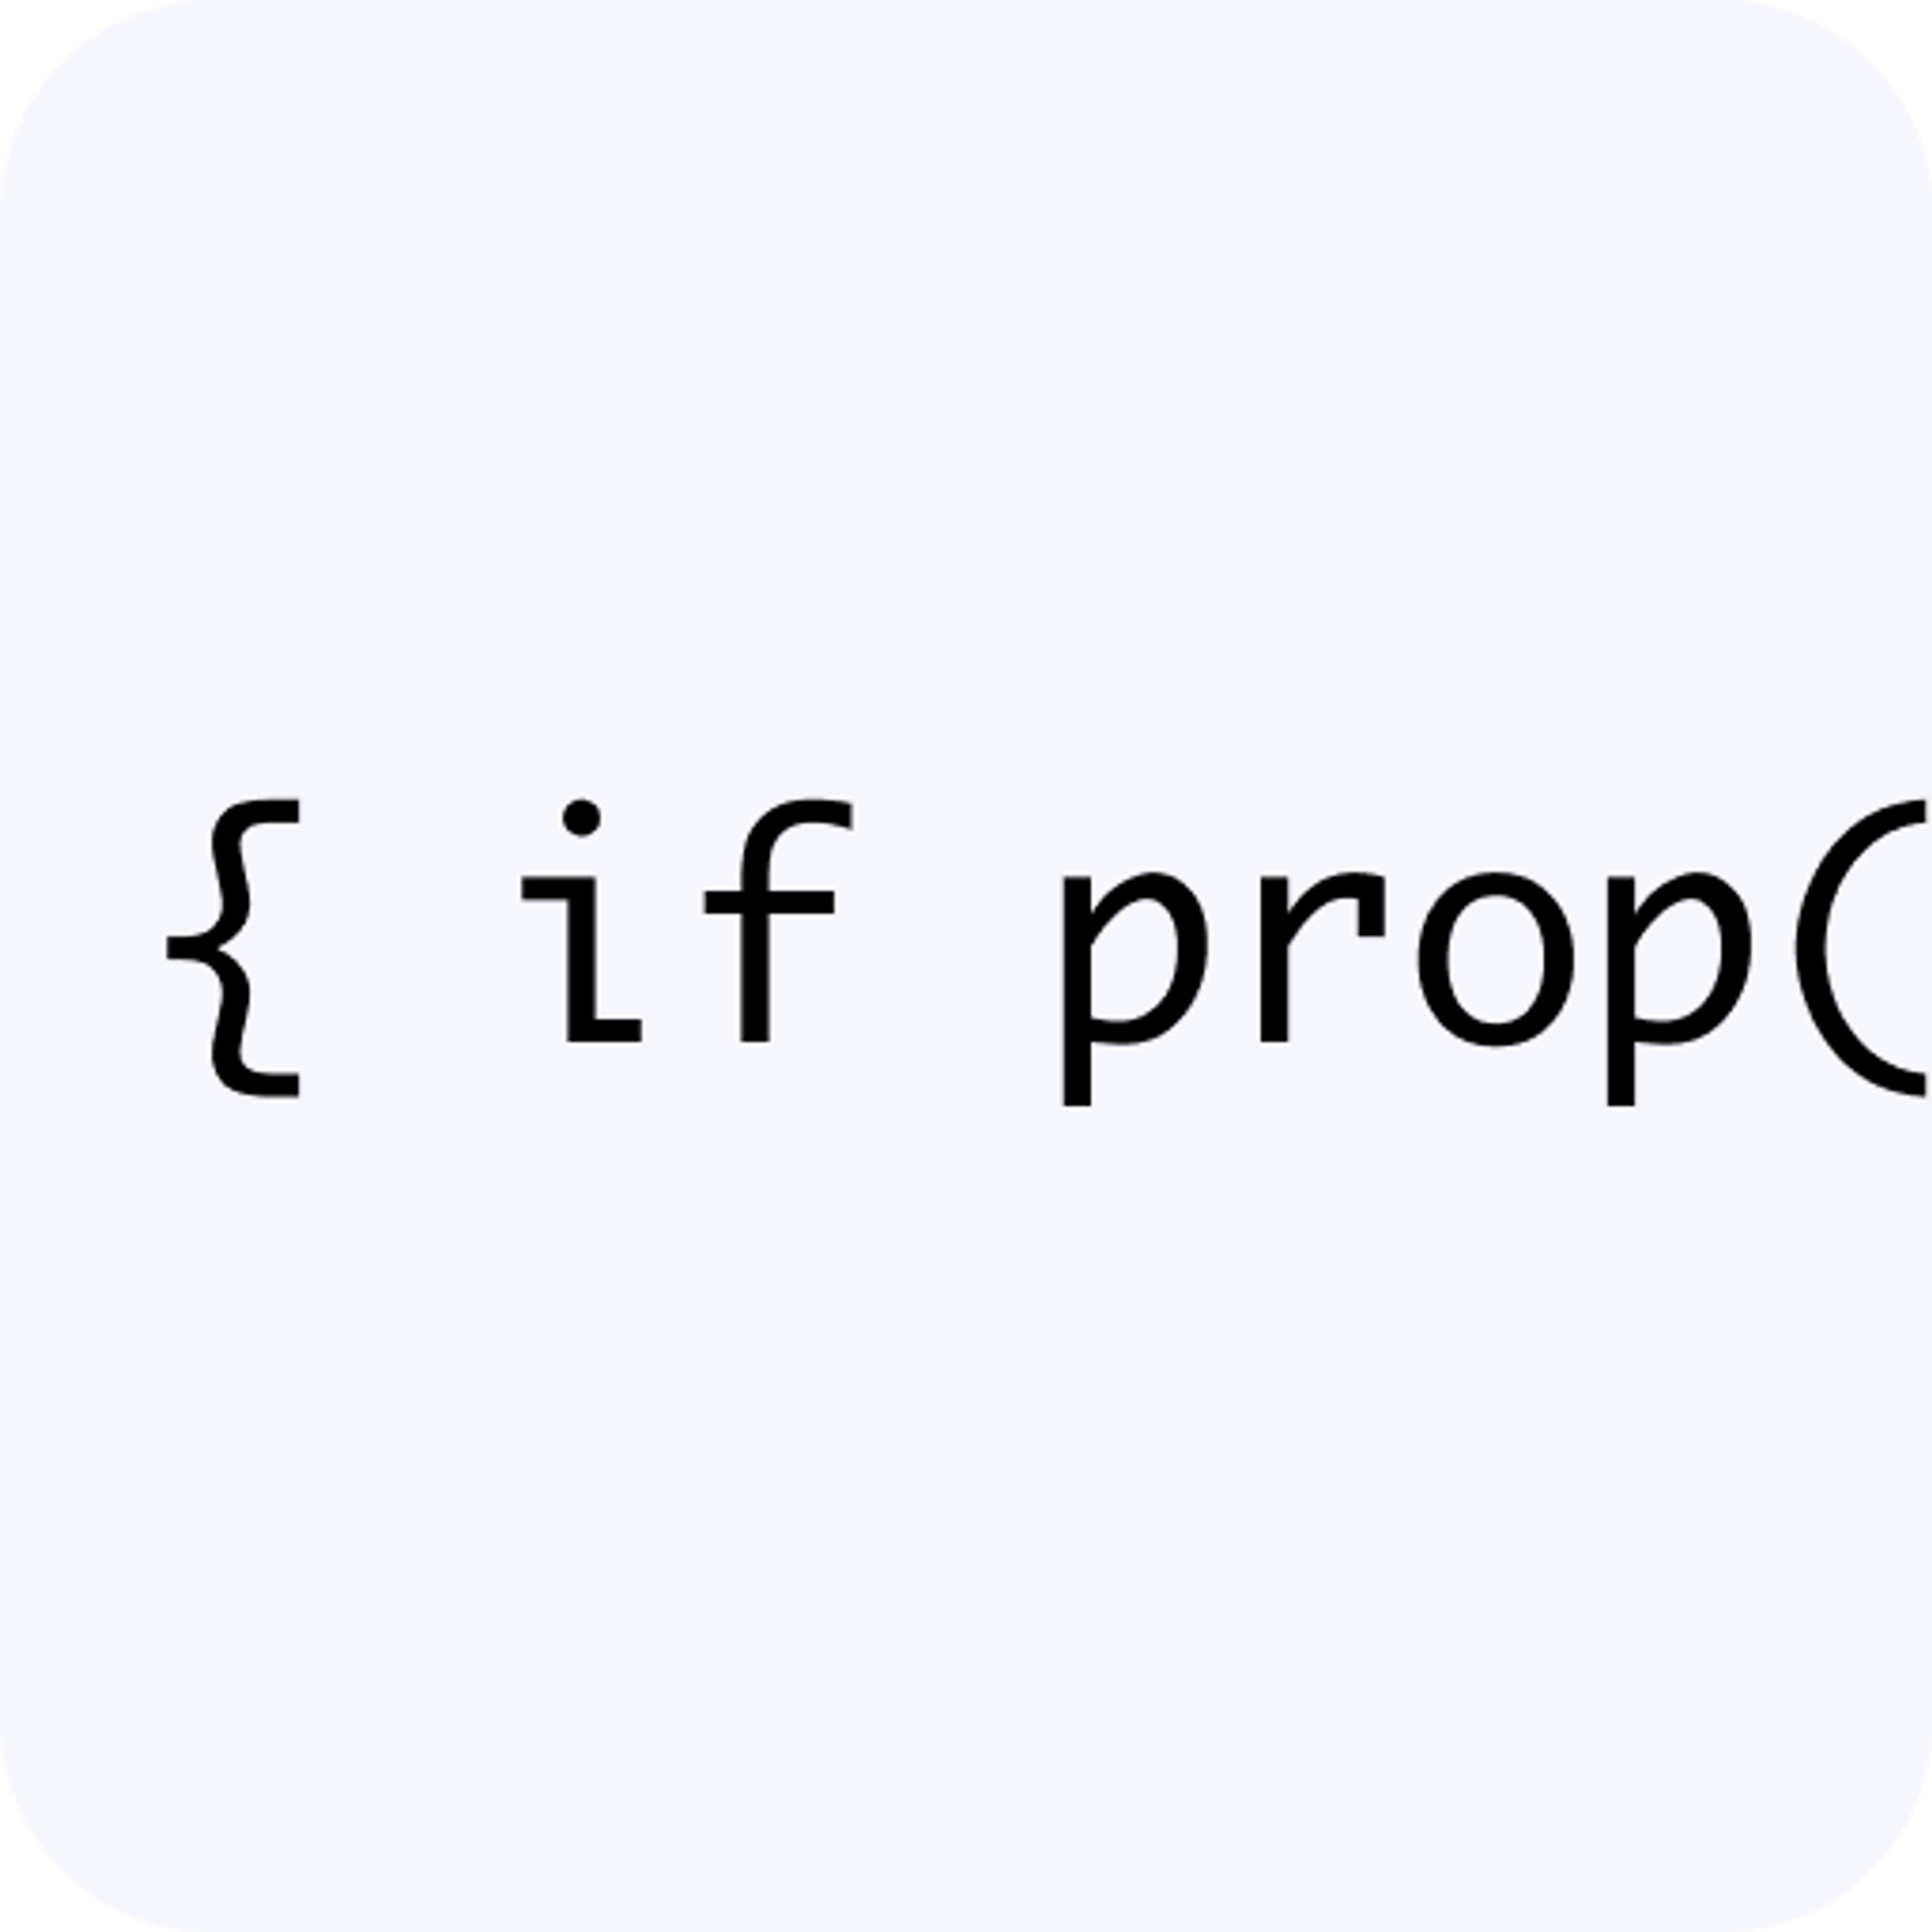 Set a default value based on the value of other properties